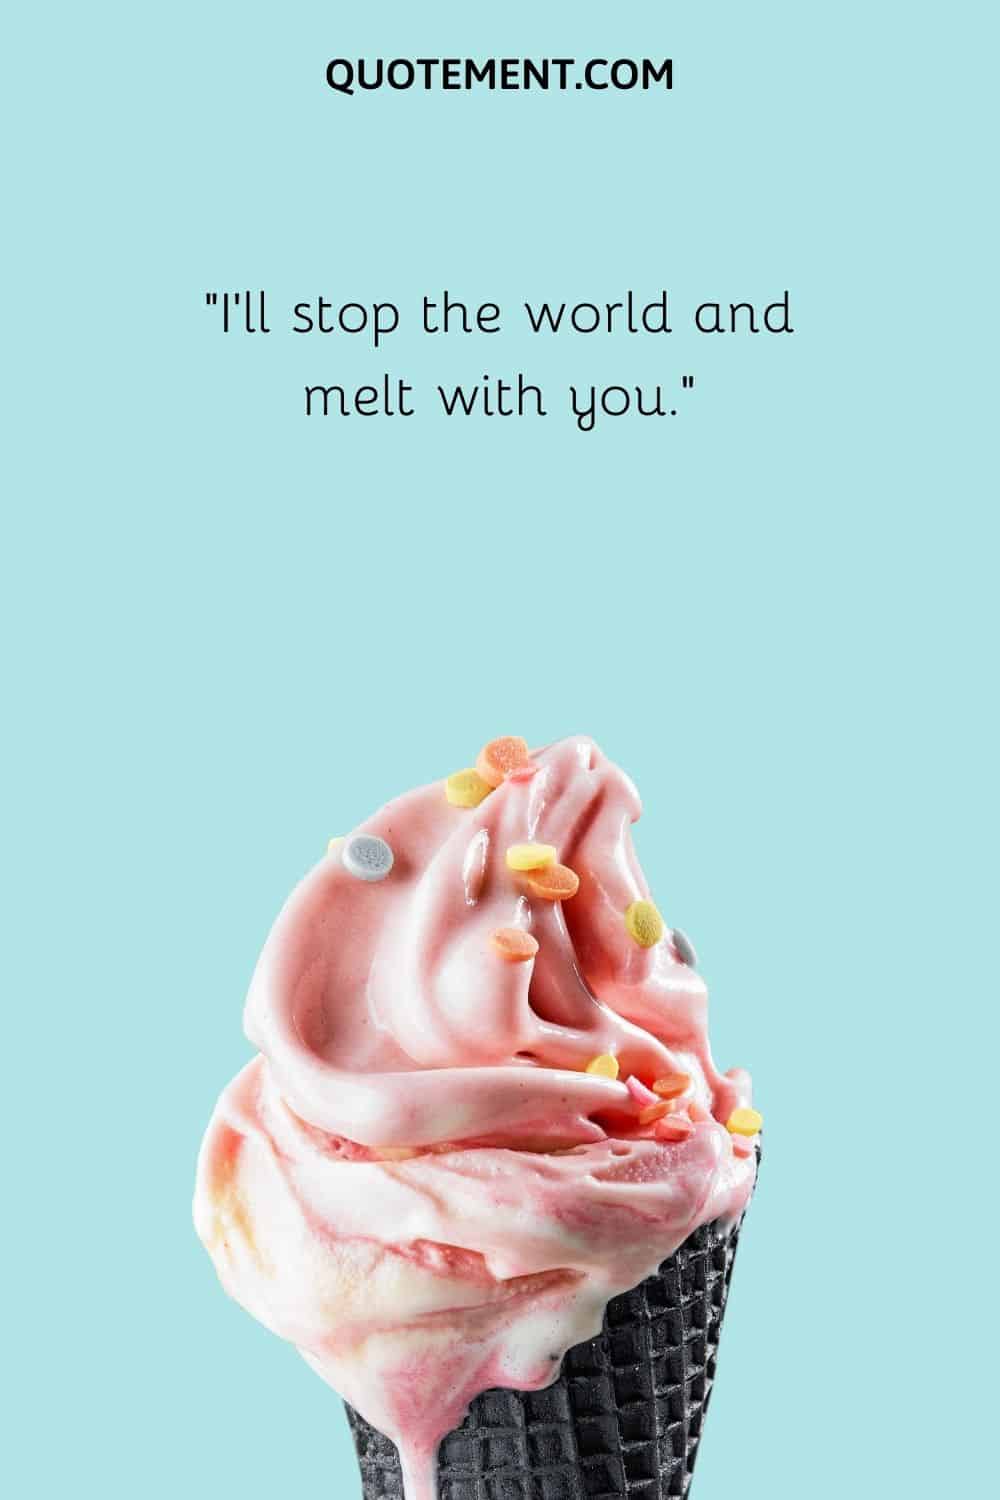 I’ll stop the world and melt with you